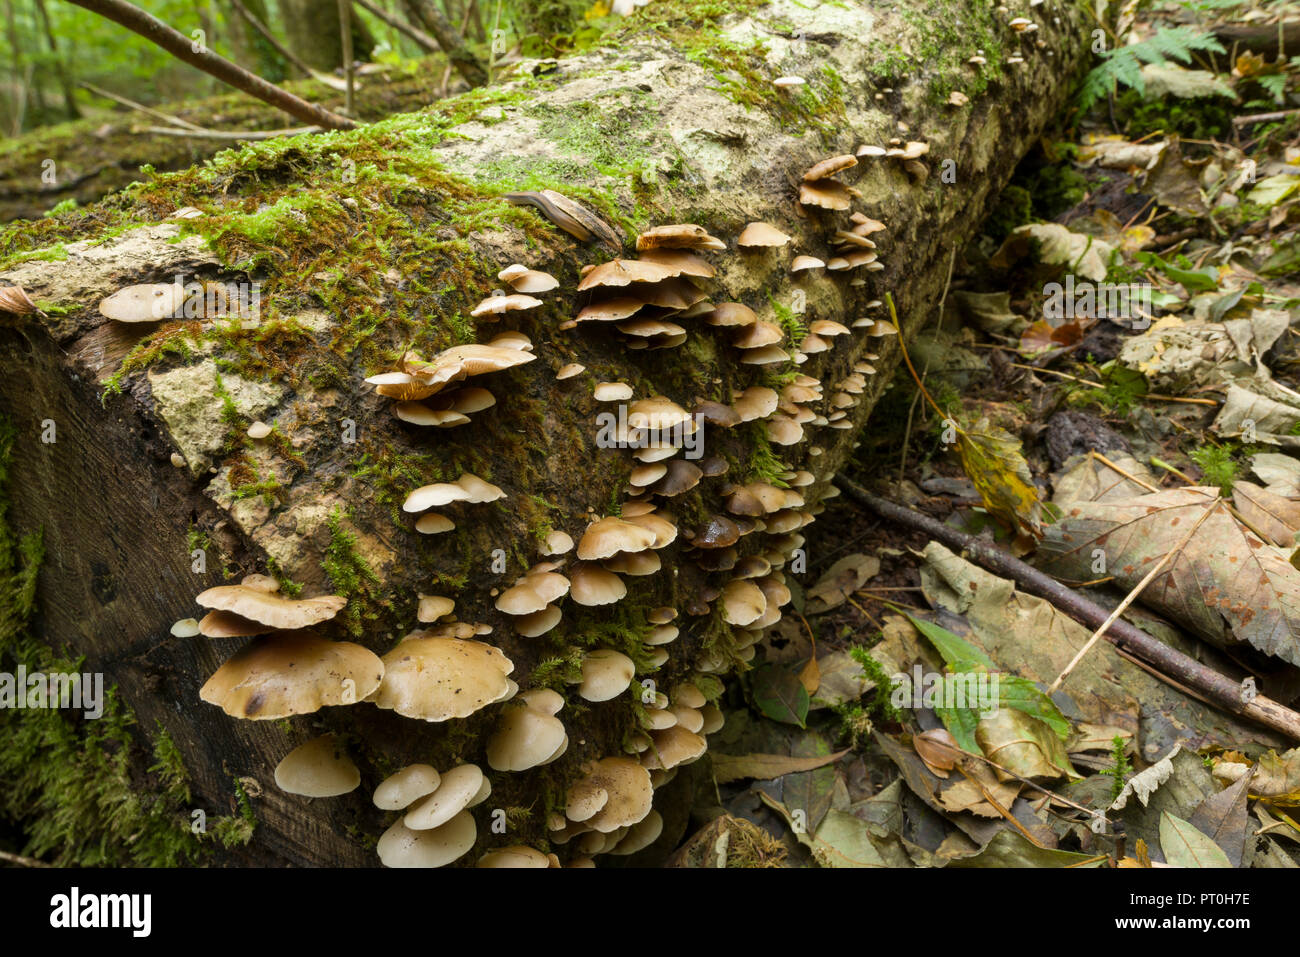 Peeling Oysterling (Crepidotus mollis) mushrooms growing on a rotting log in a deciduous woodland. Goblin Combe, North Somerset, England. Stock Photo